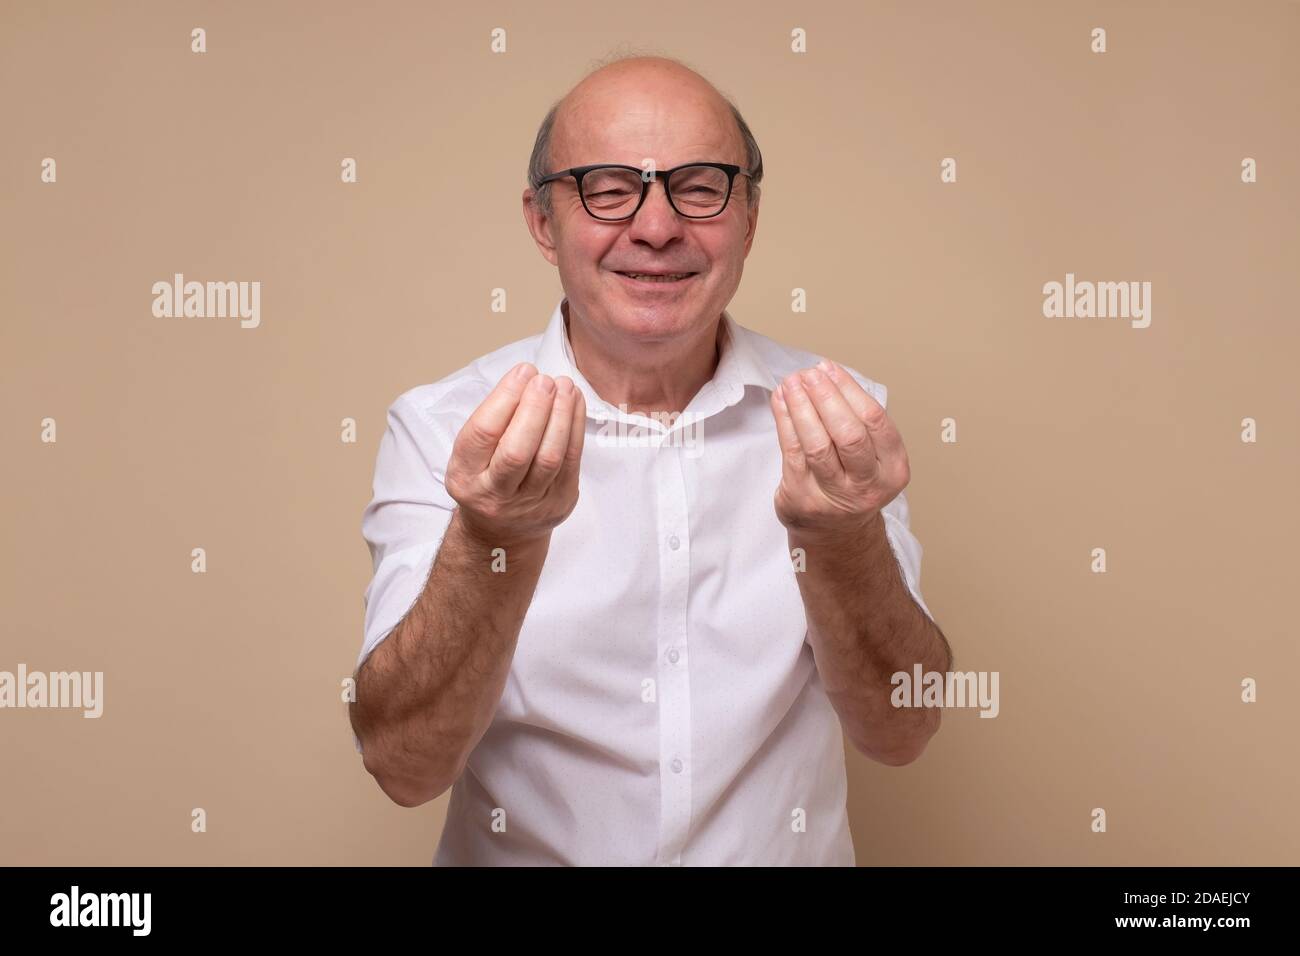 Bald handsome senior man looking angry showing italian gesture. Stock Photo